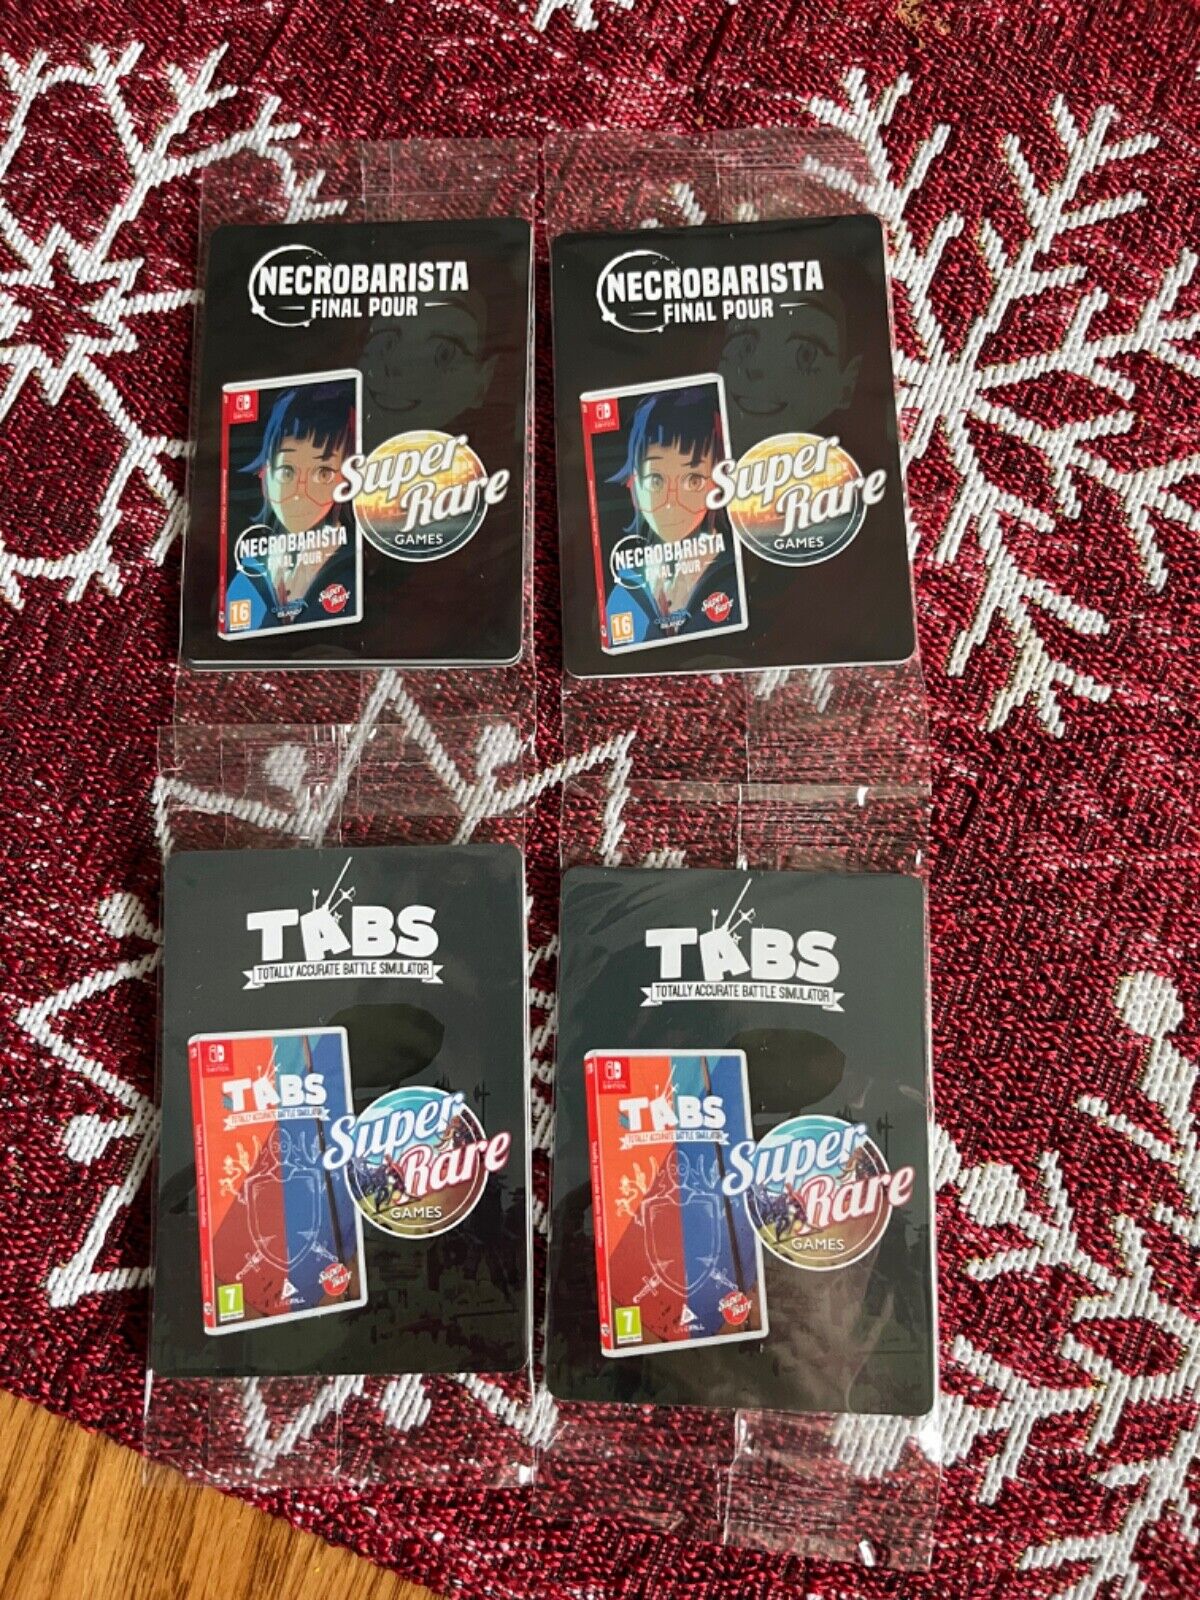 Super Rare Games Card Lot#2(Set of 6 Packs)(Brand New/Sealed)(Tabs/Necrobarista)